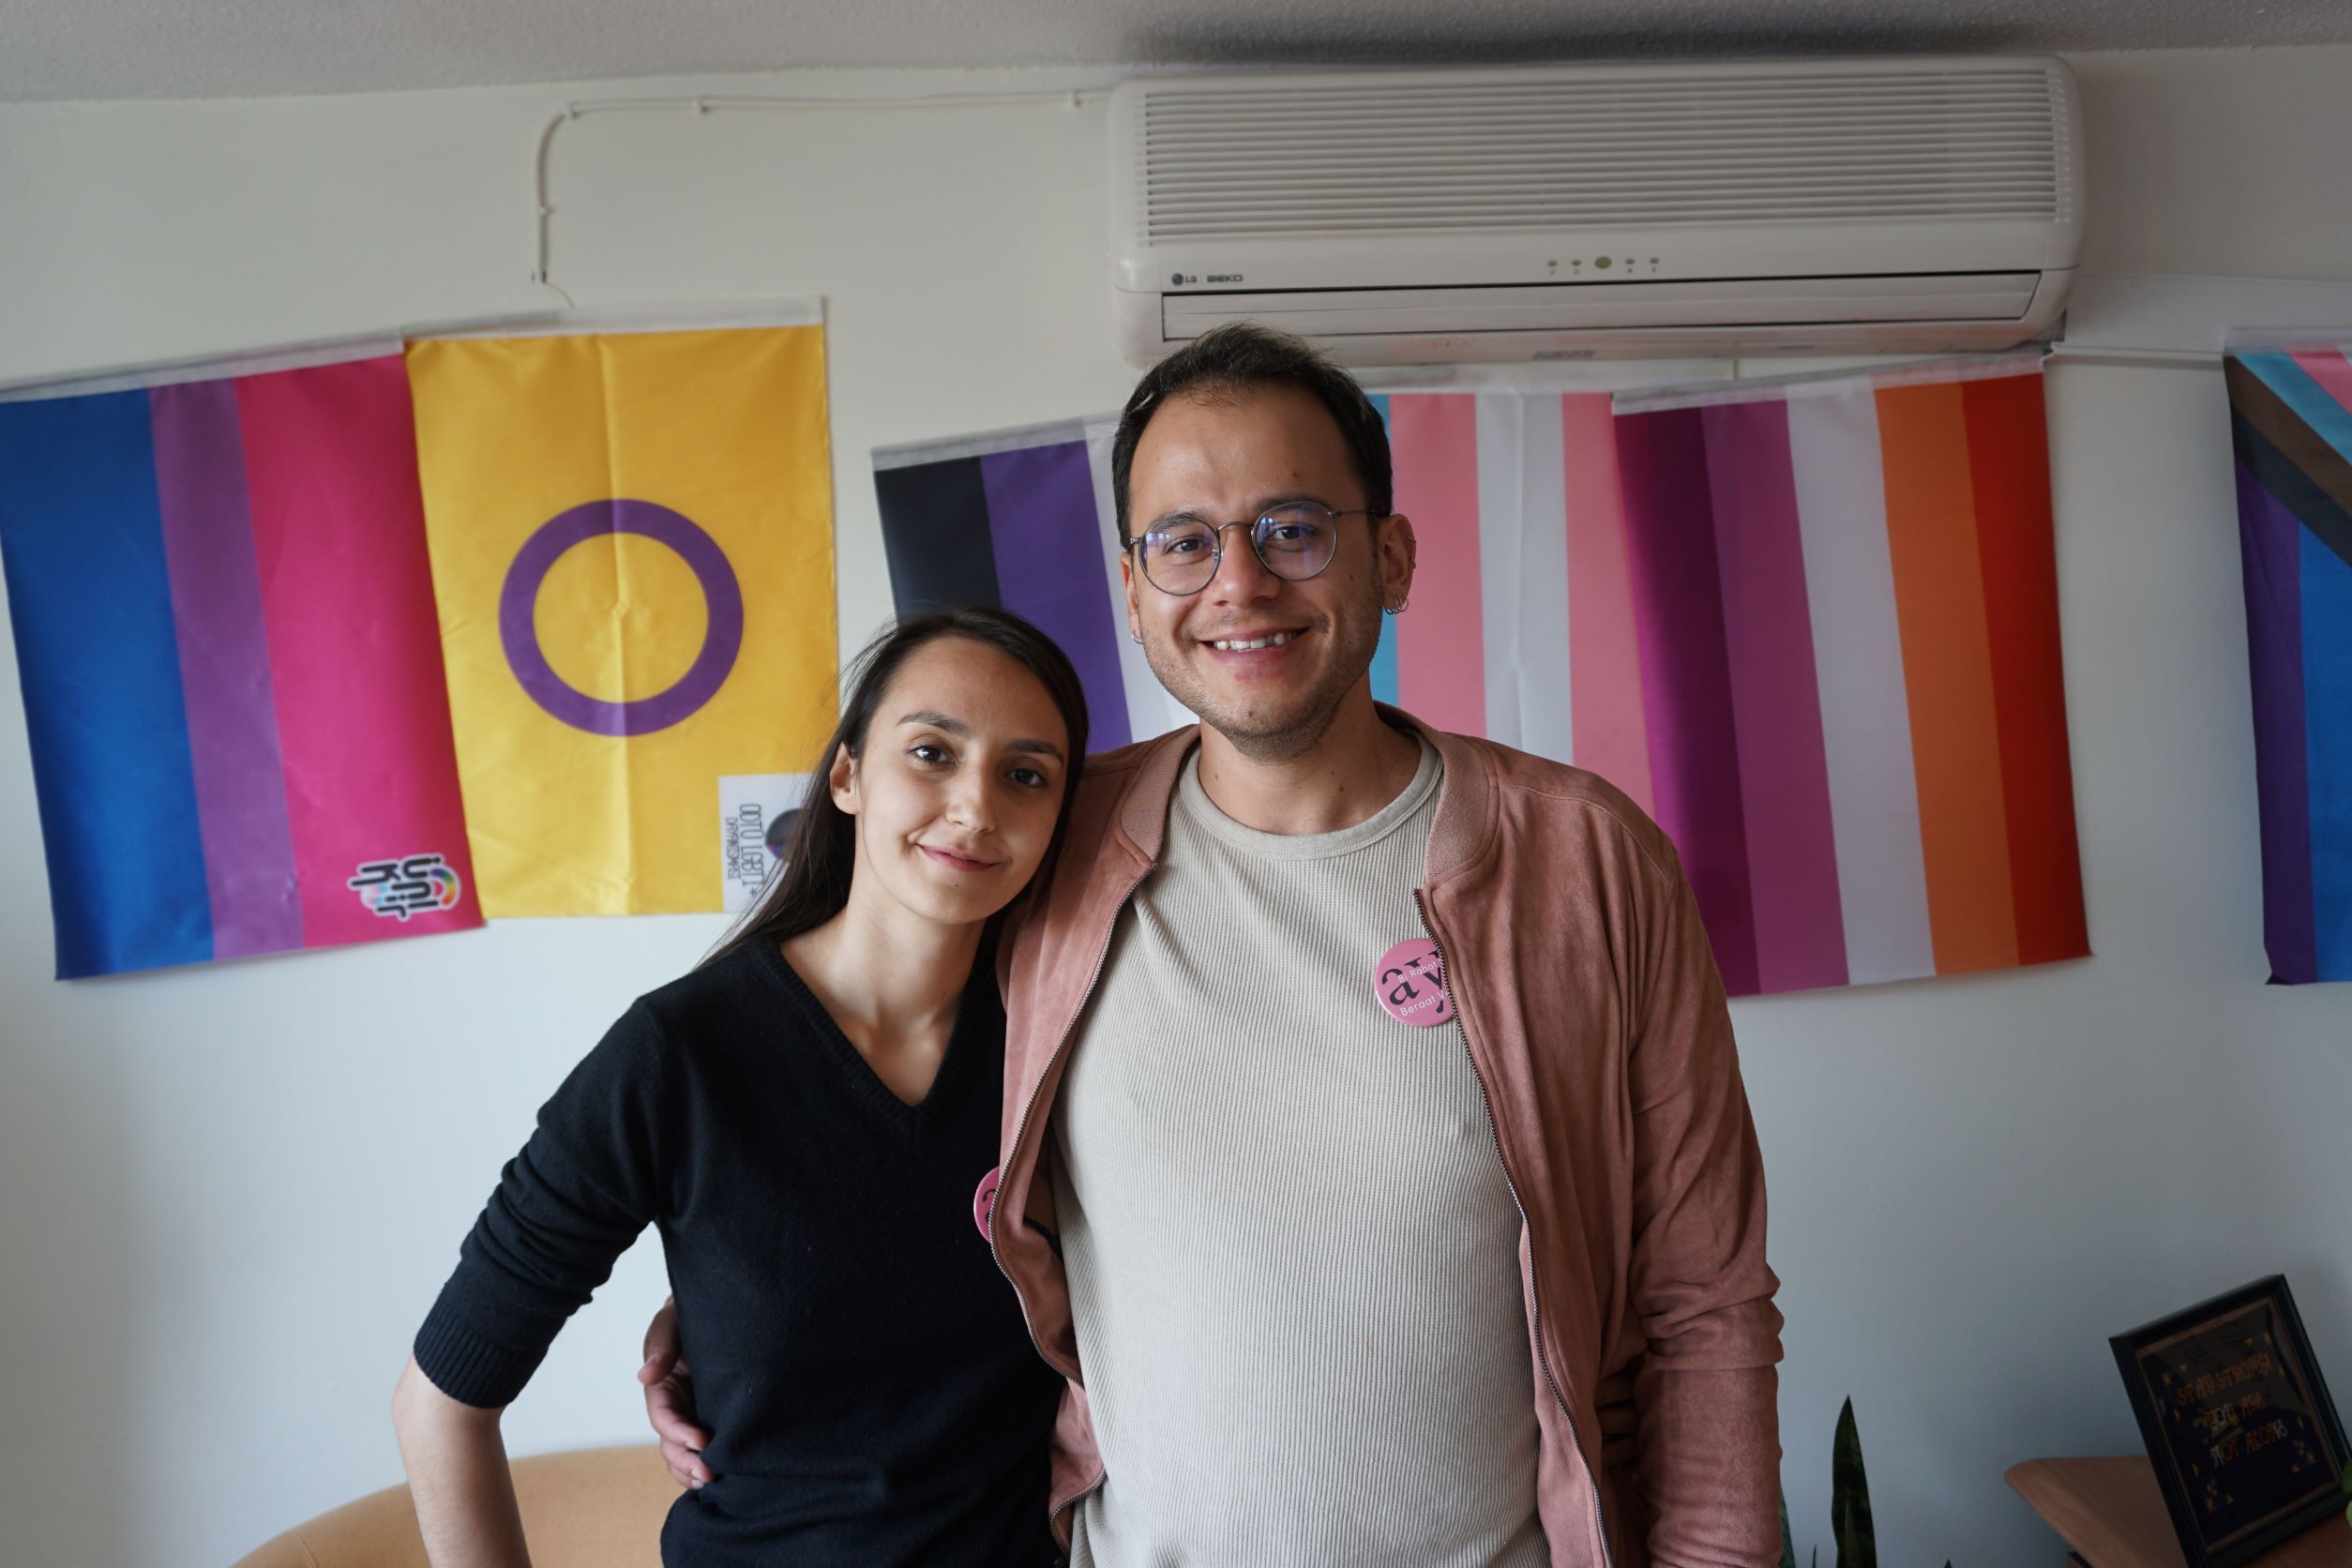 Melike Balkan and Özgür Gür smile at the camera, with an arm around each other, standing in front of a wall with Pride flags hanging on it